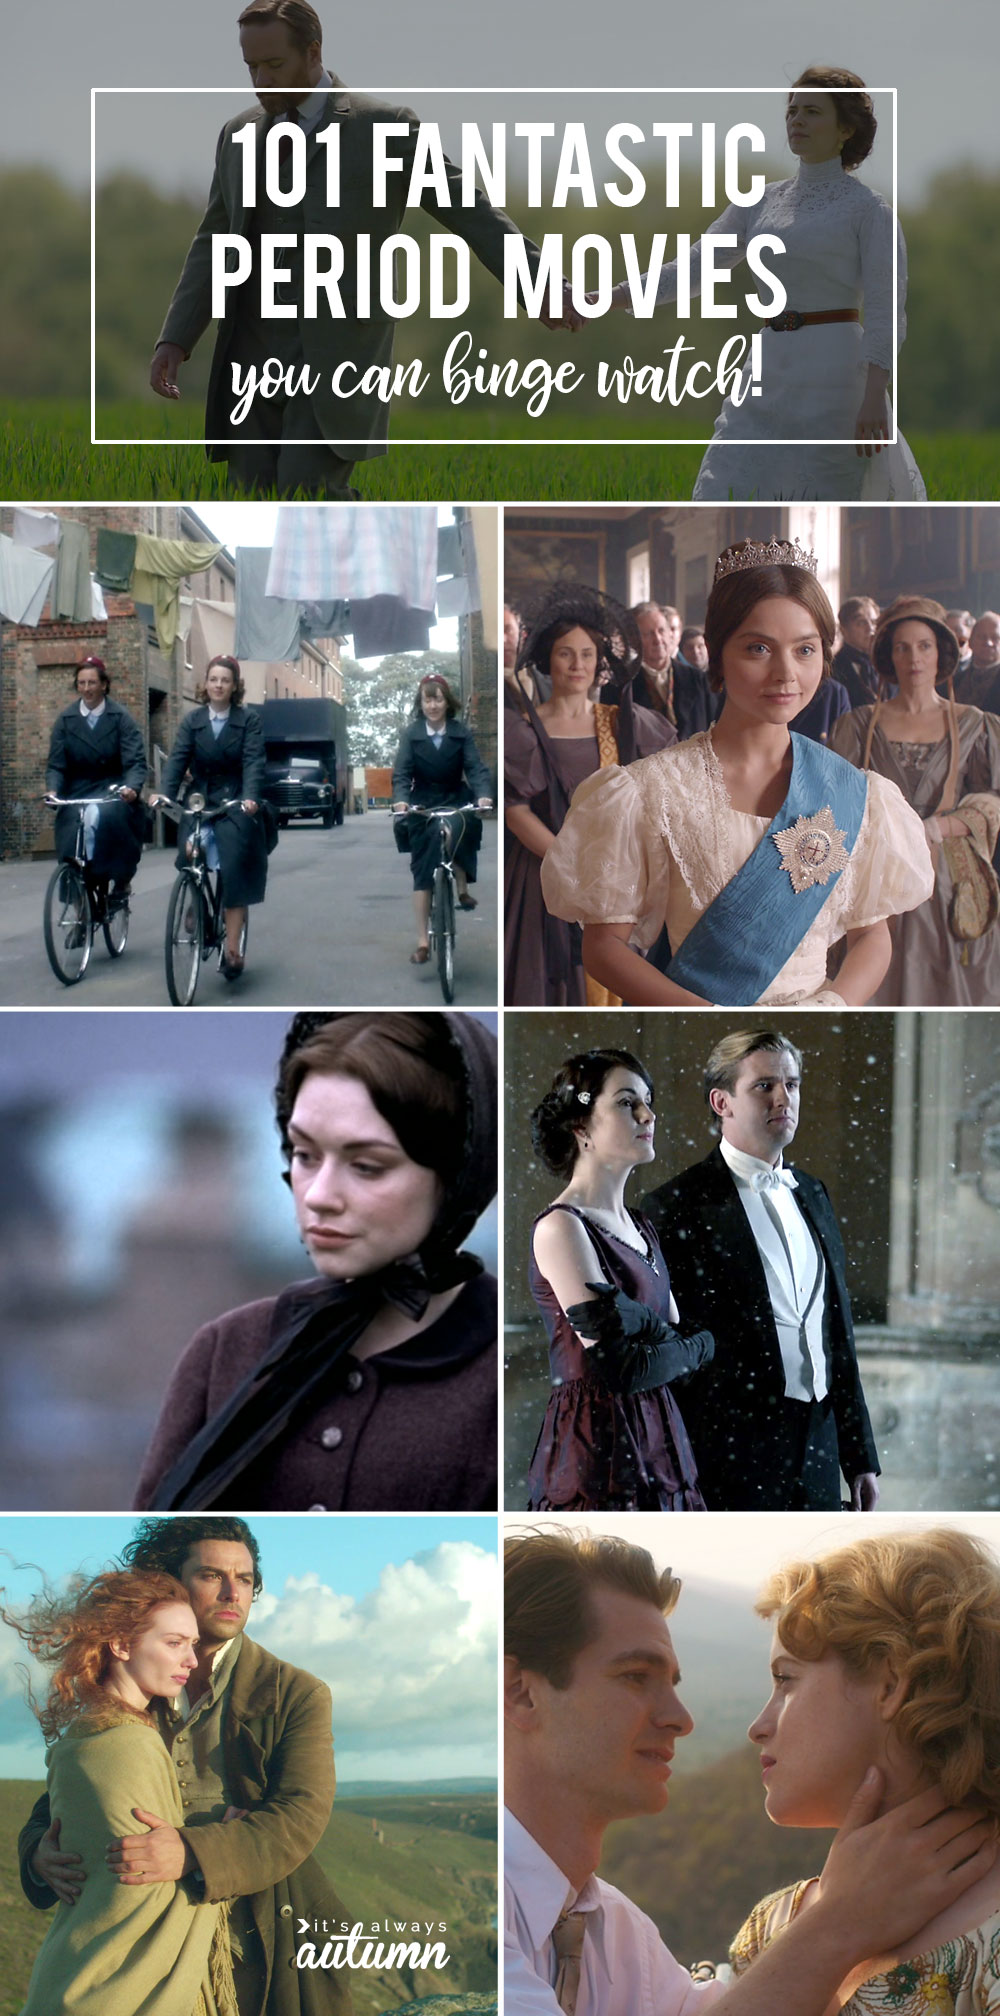 Collage of screenshots from favorite period movies